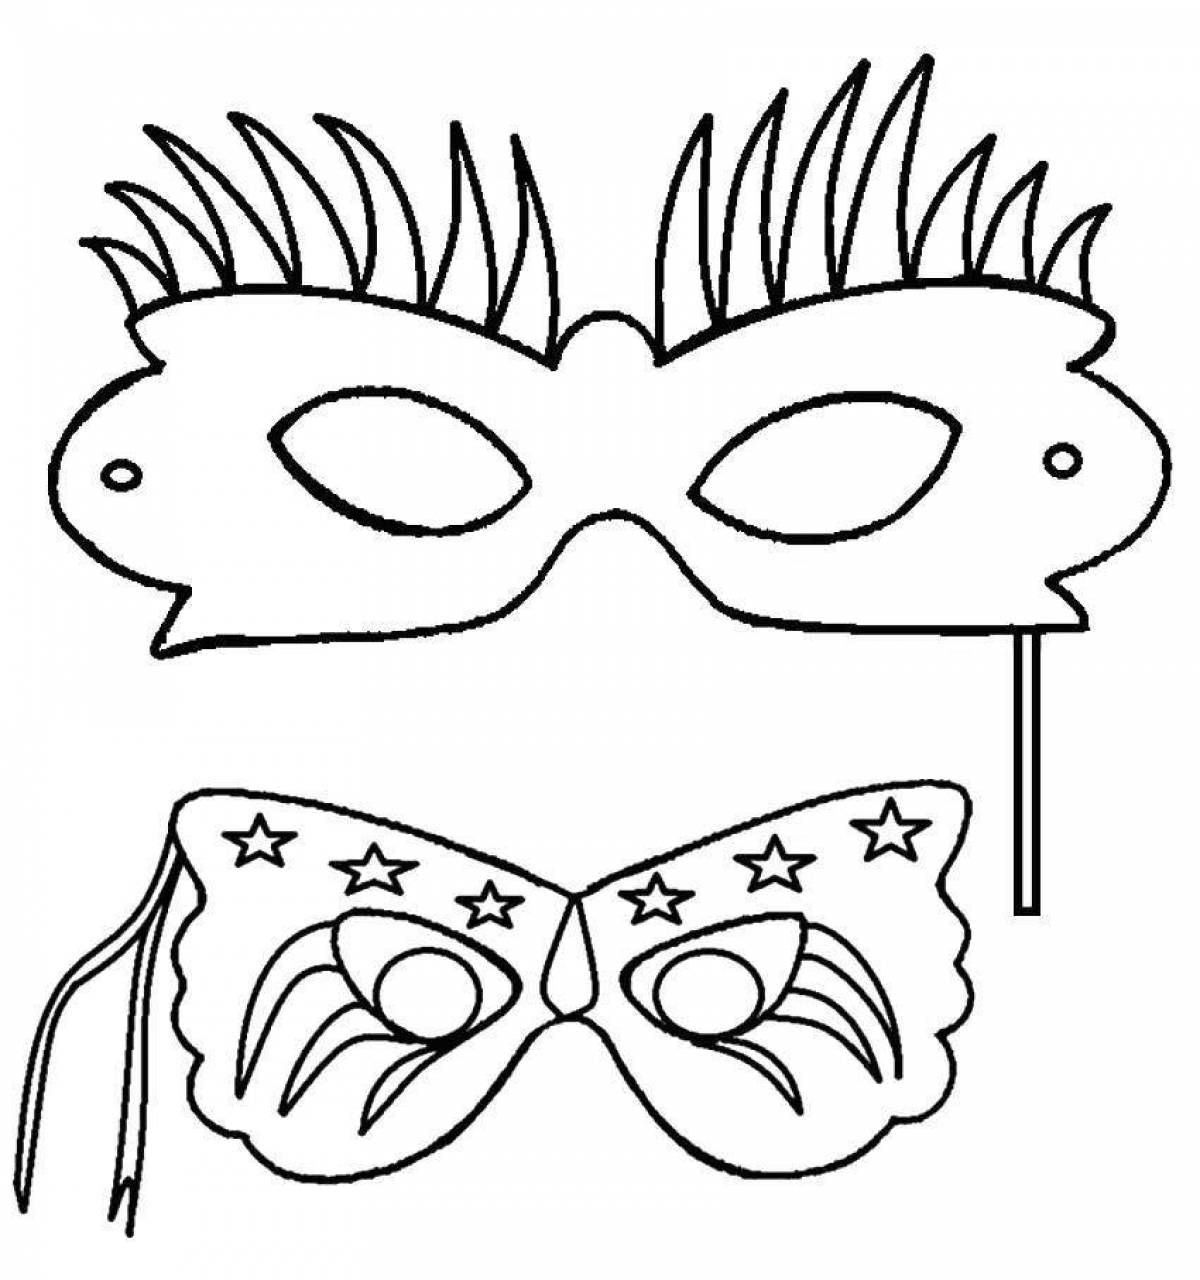 Coloring page playful carnival mask